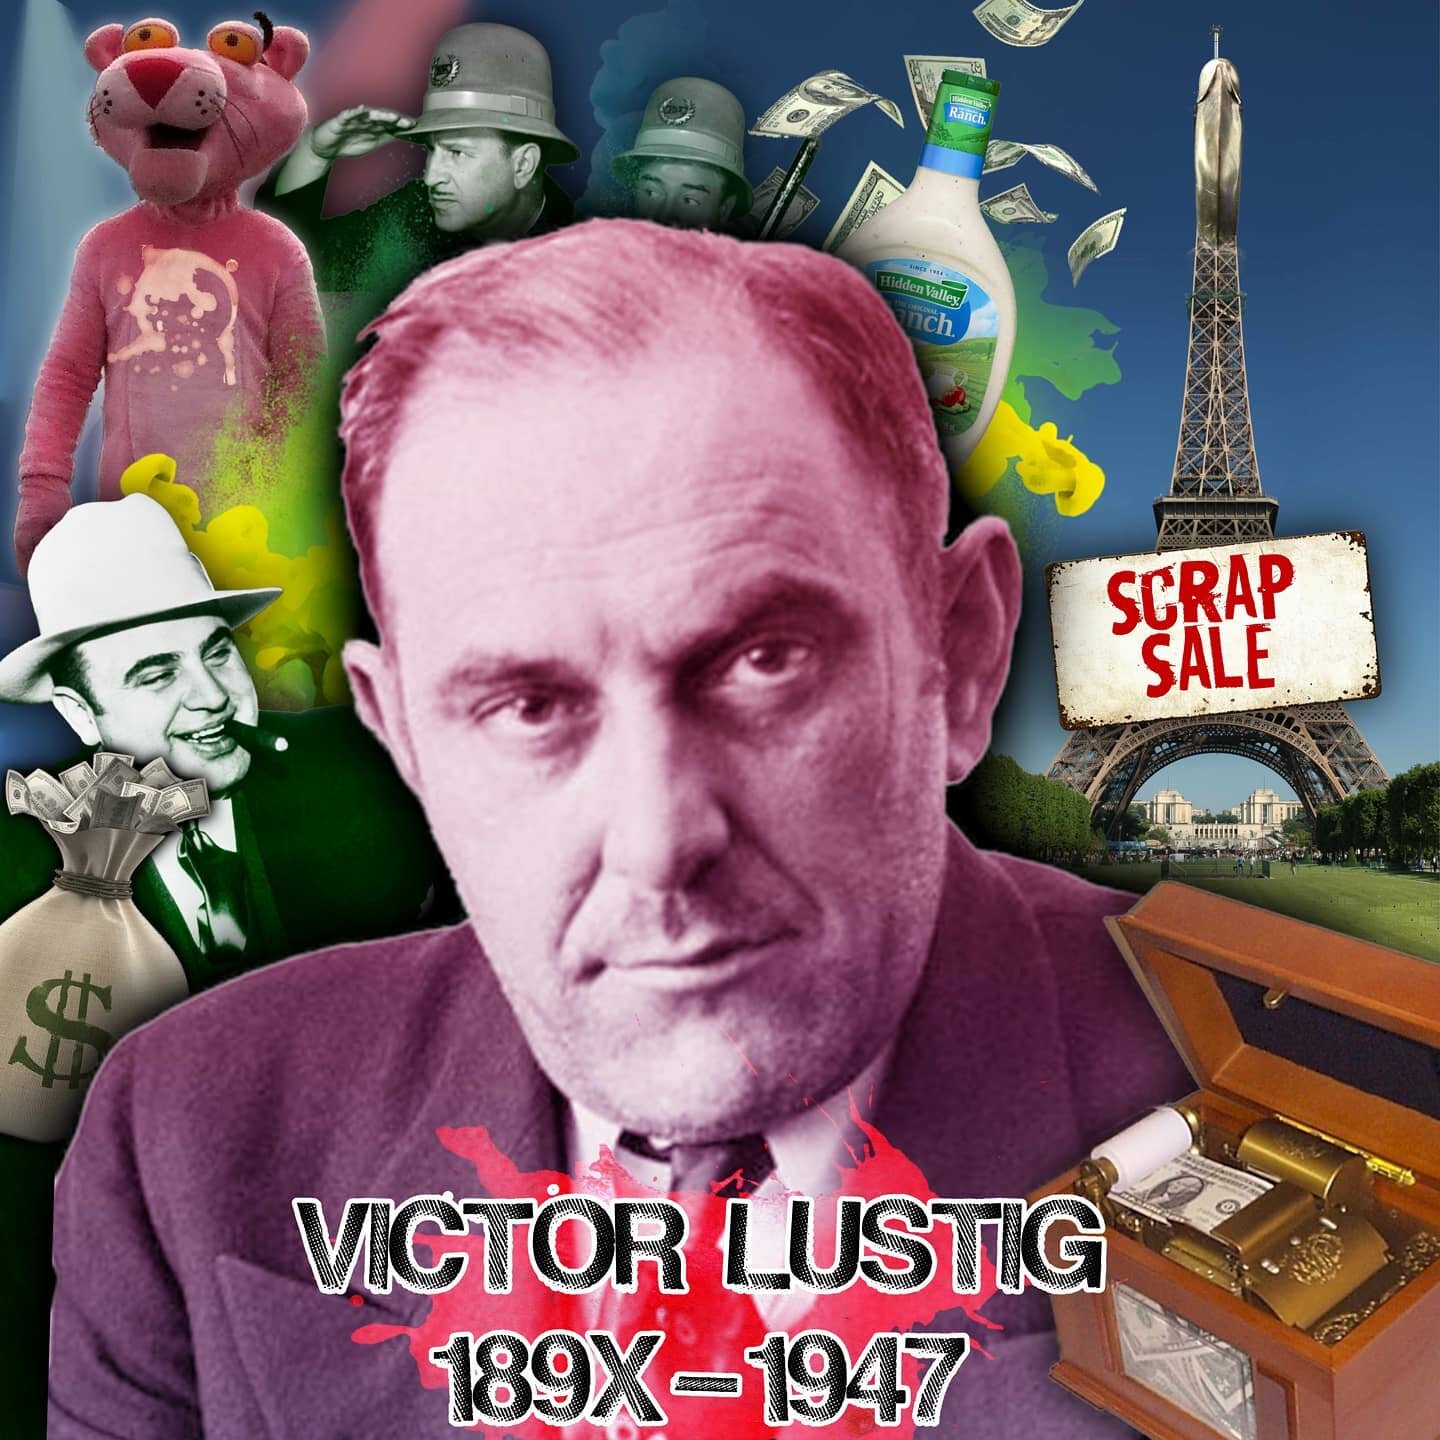 NEW EPISODE

Victor Lustig could talk his way out of a fleshy, hairy bag. This infamous cat burglar con many a man out of their fortunes including syphilitic sausage mobster Al Capone. This man was such a smooth talker he even 'sold' France's most ic